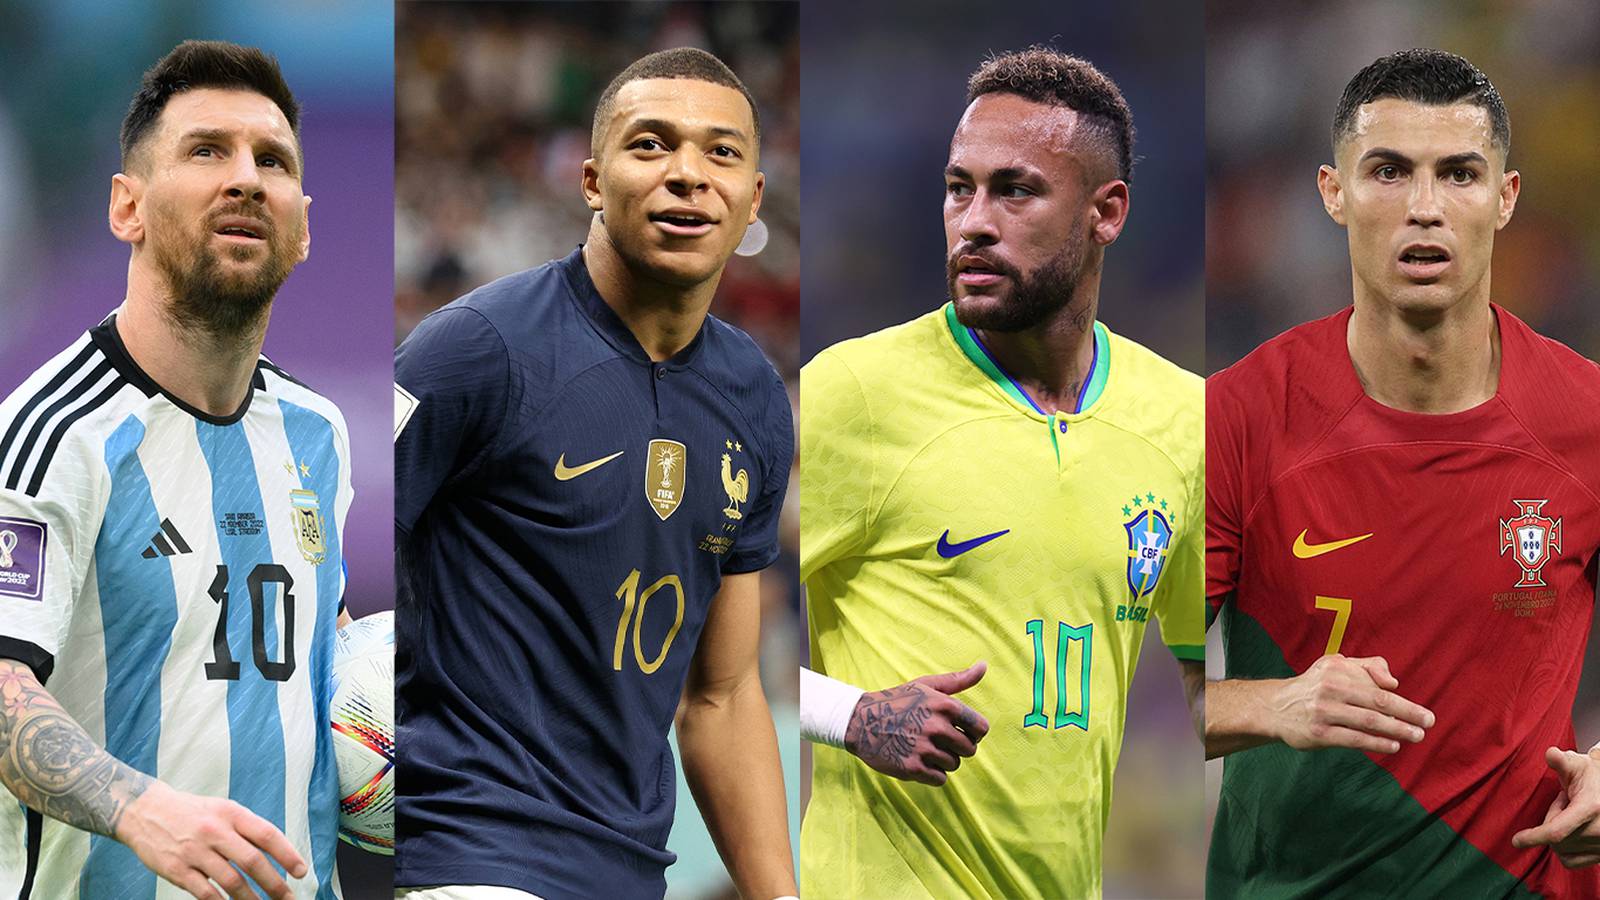 Messi Mbappe Neymar Ronaldo World Cup Watch How Have They Fared In Qatar So Far